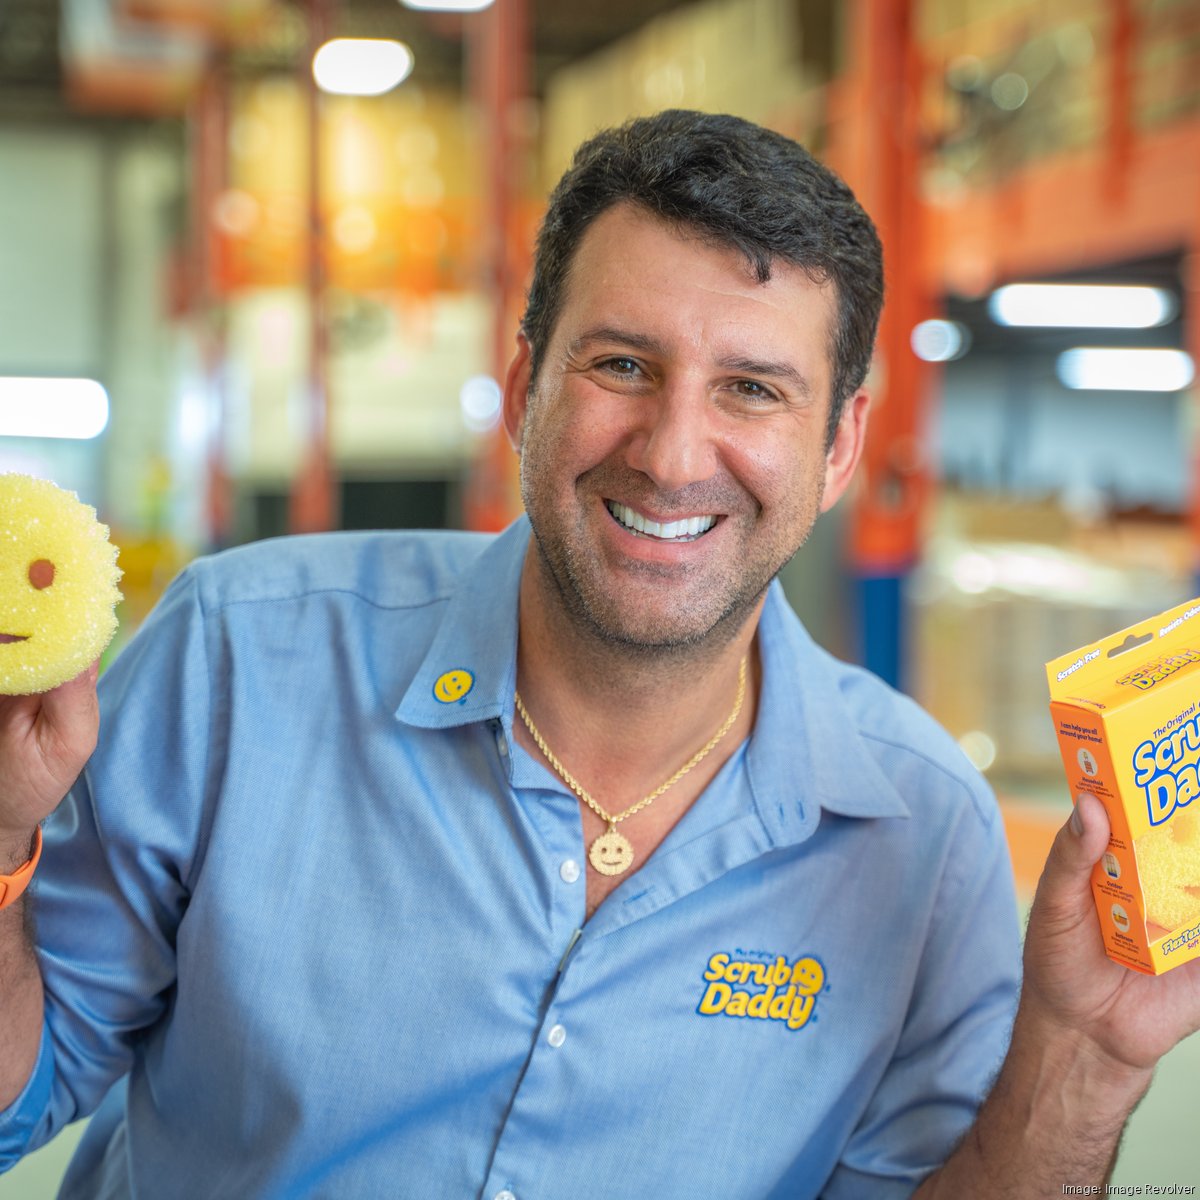 CEO of Shark Tank darling Scrub Daddy open to selling company -  Philadelphia Business Journal